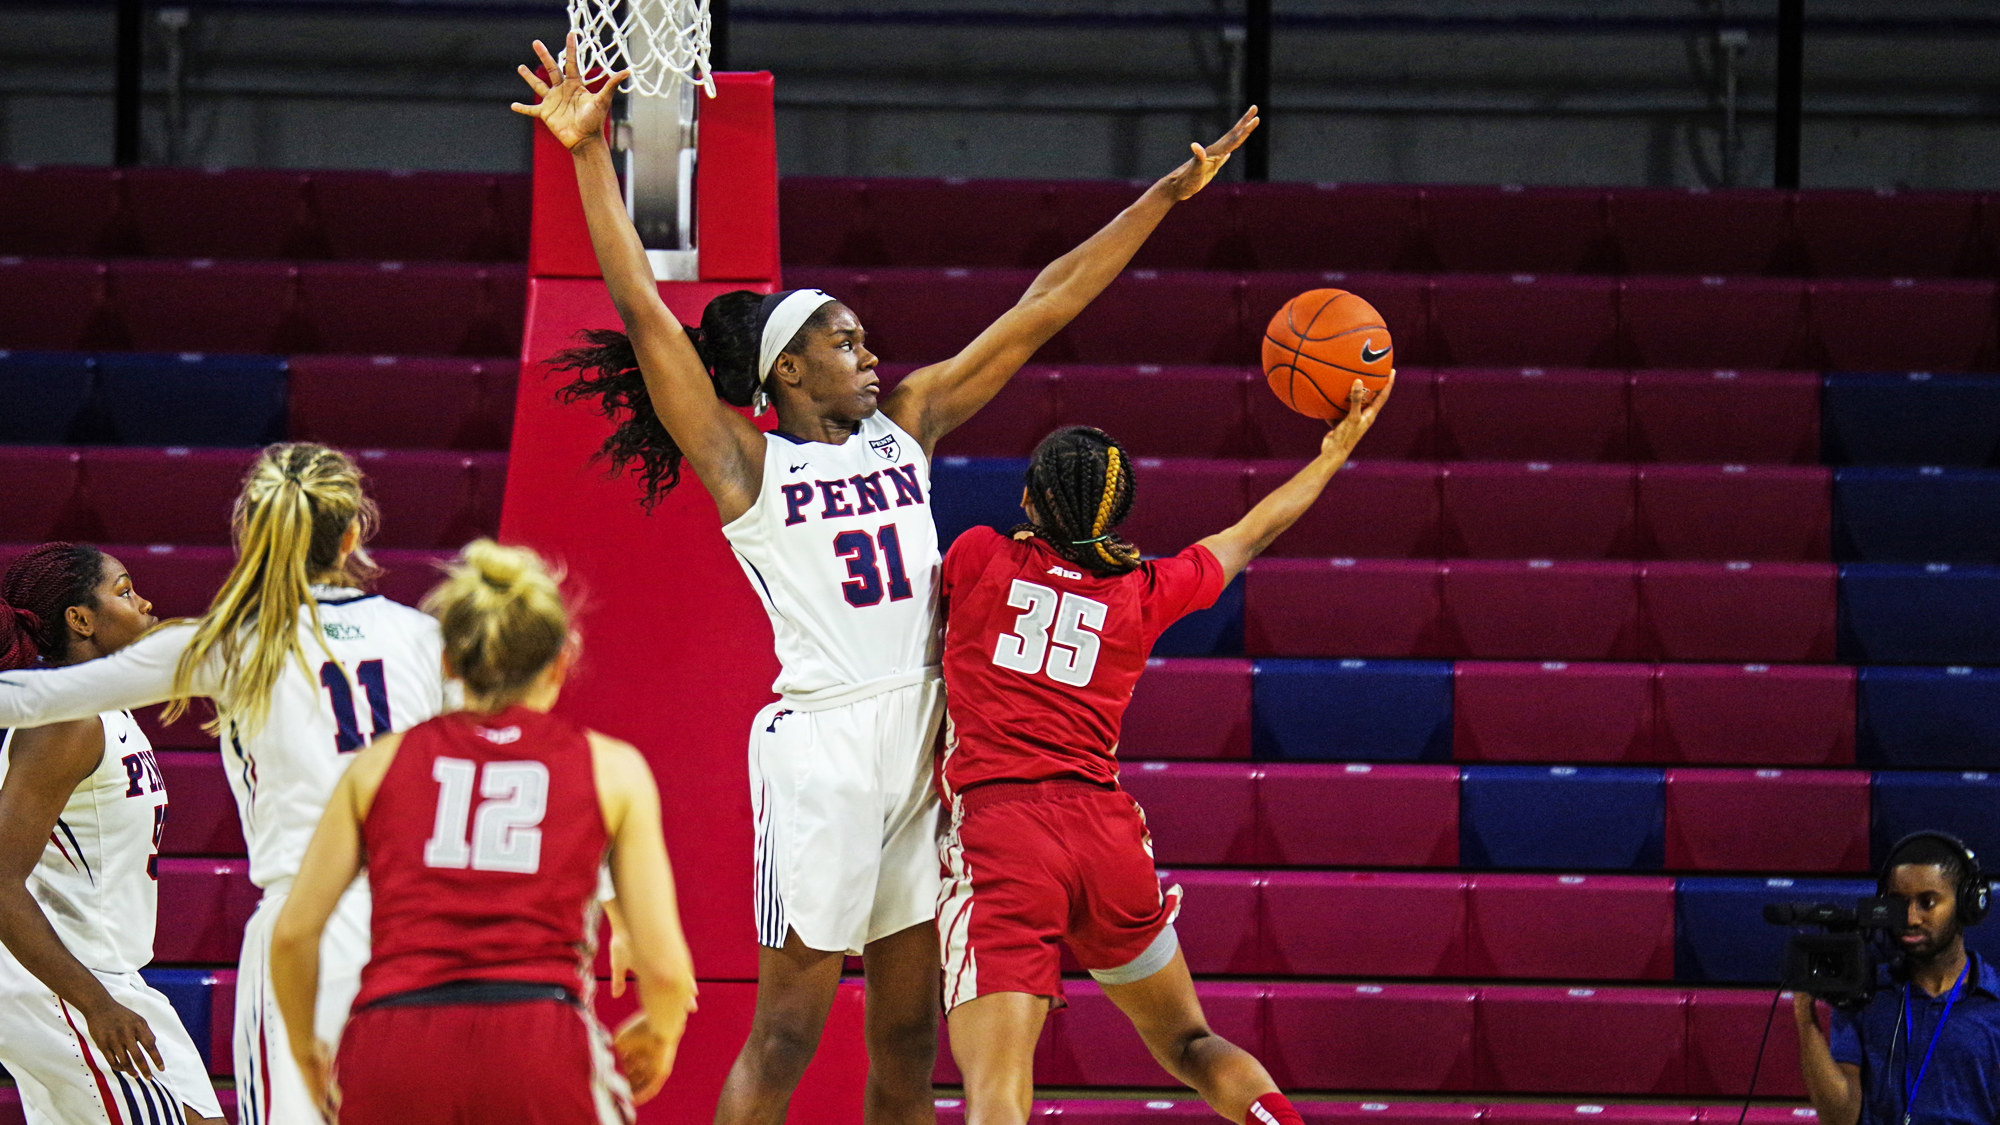 Center Eleah Parker attempts to block a shot during a game at The Palestra